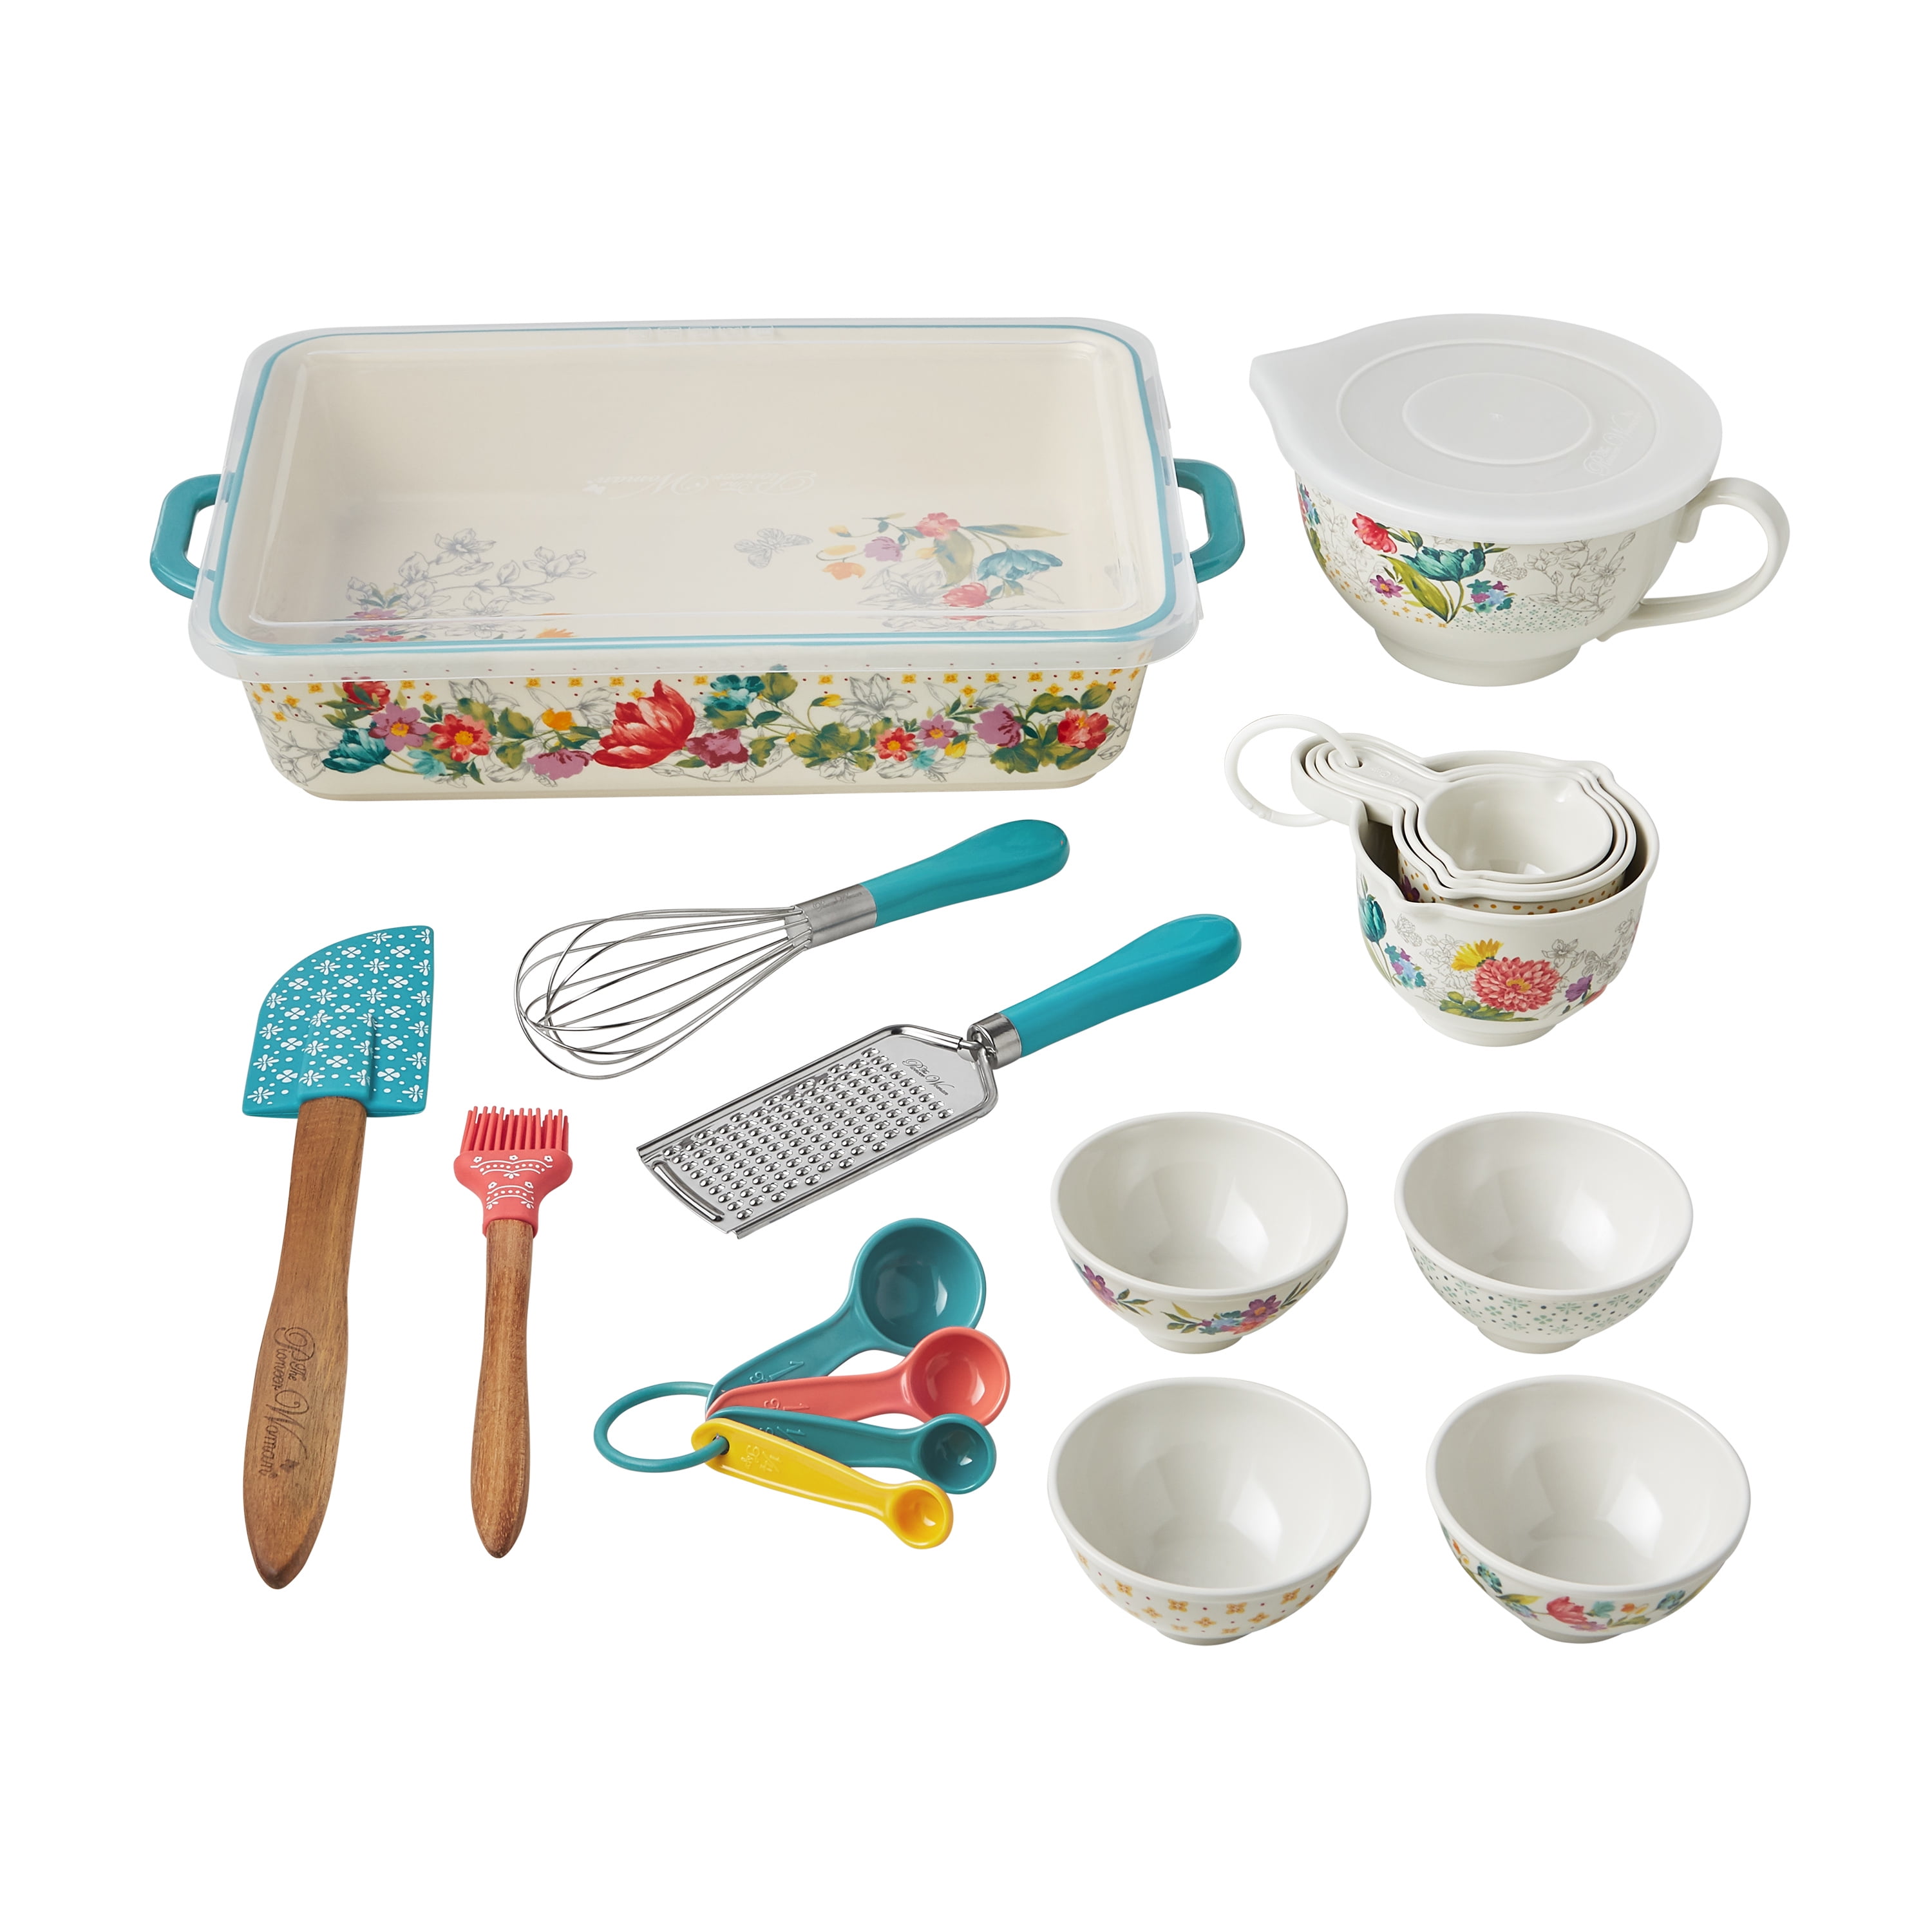 Find Pioneer Woman cookware, bakeware, kitchen gifts for under $50 